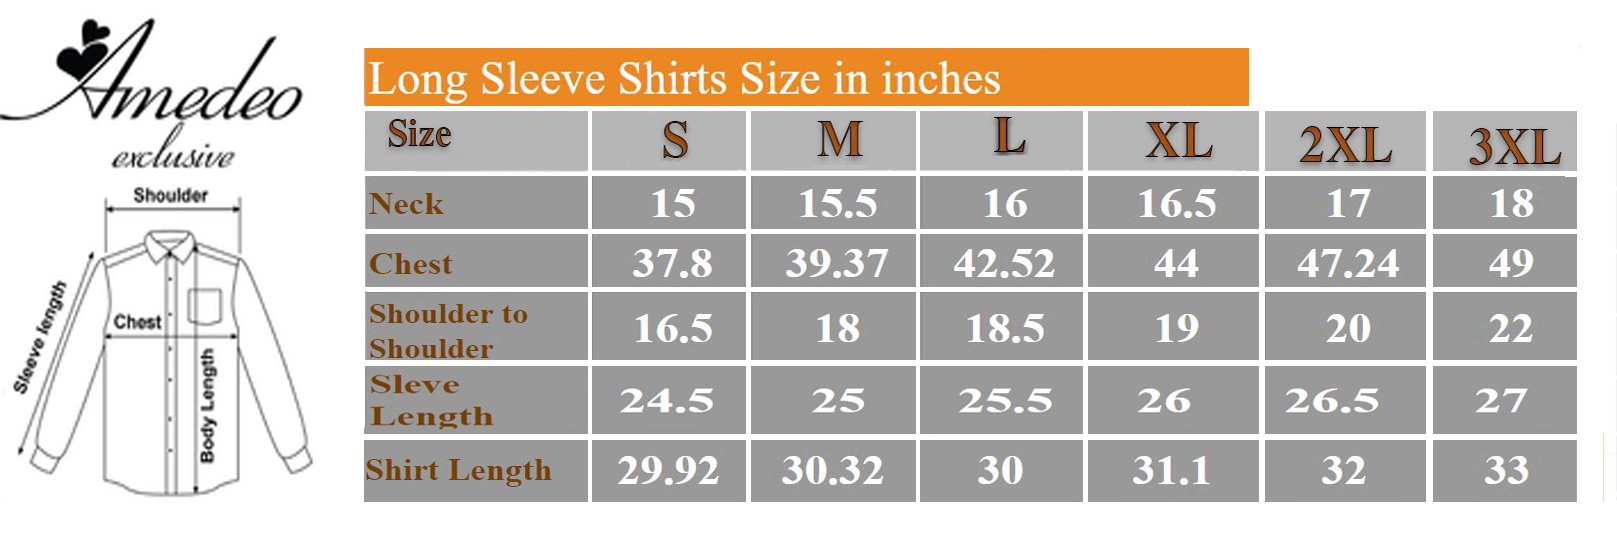 Beige Mens Slim Fit Designer Dress Shirt - tailored Cotton Shirts for Work and Casual Wear - Amedeo Exclusive